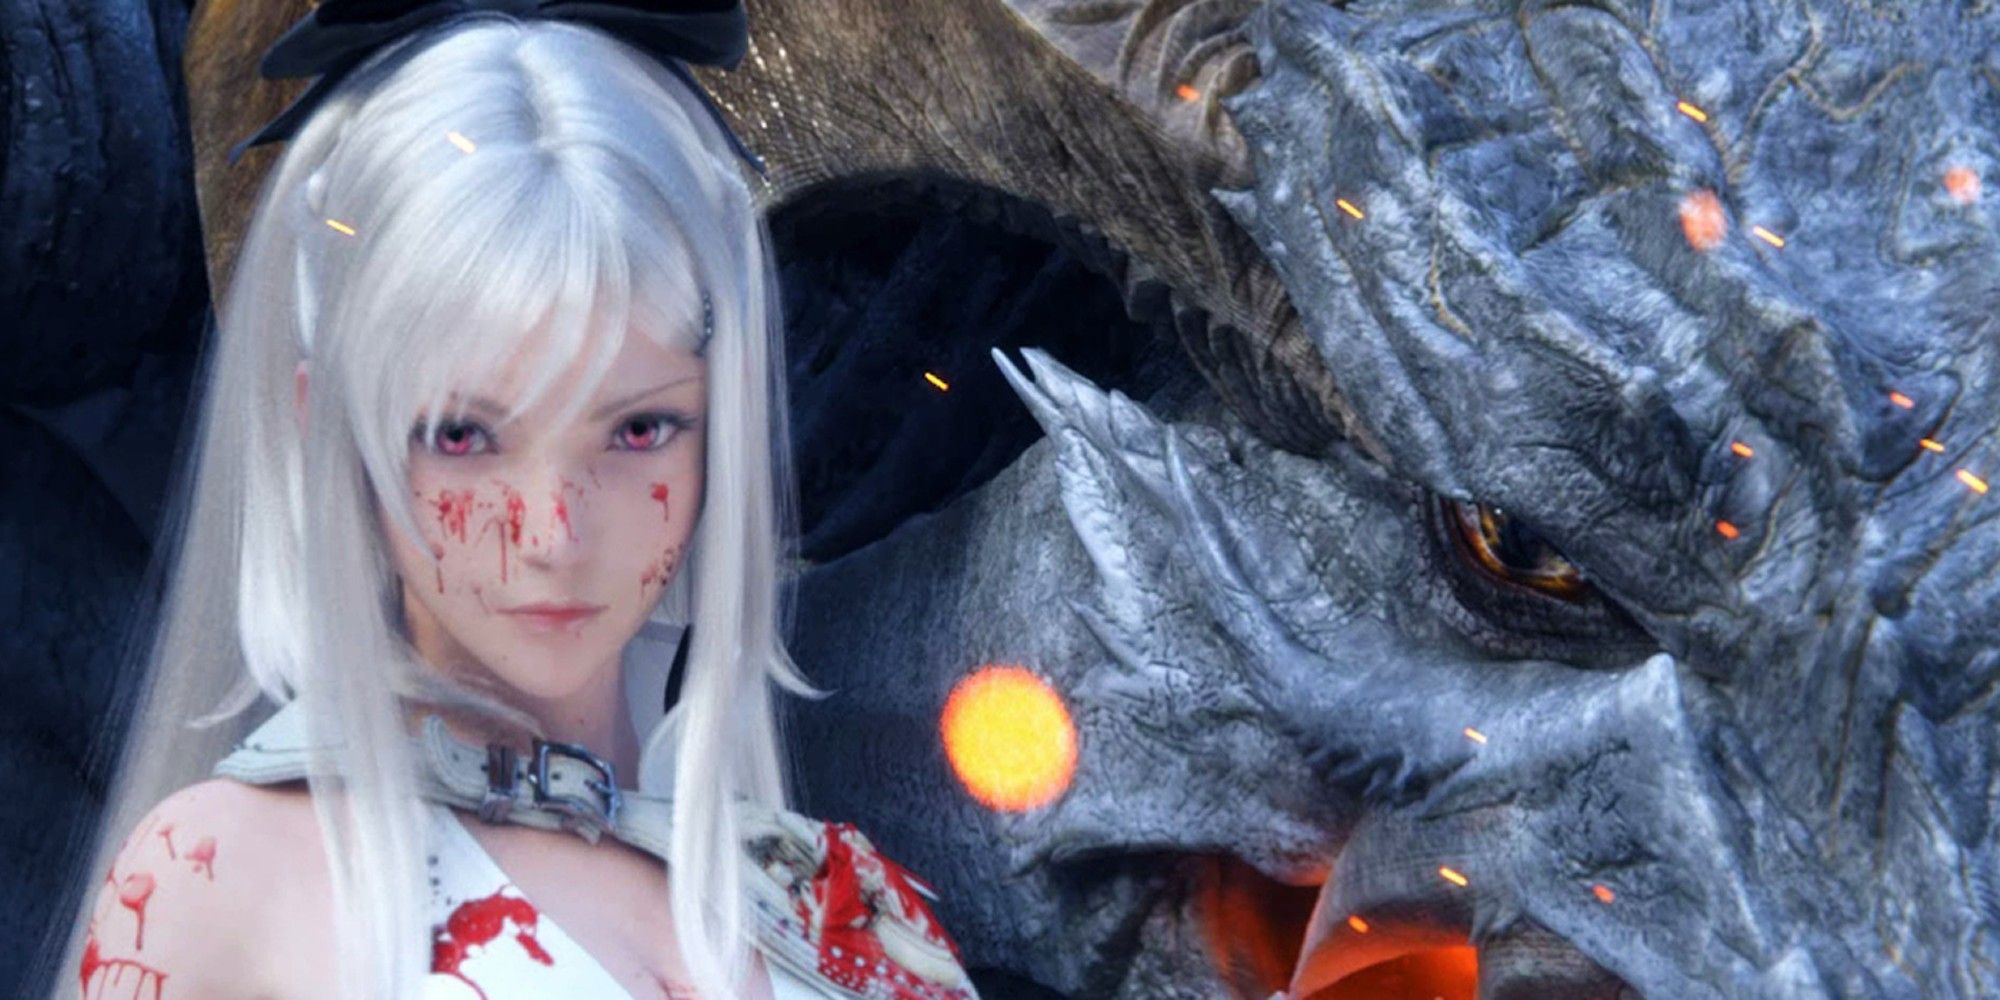 Drakengard 3 Zero covered in blood, with her dragon Mikhail with her